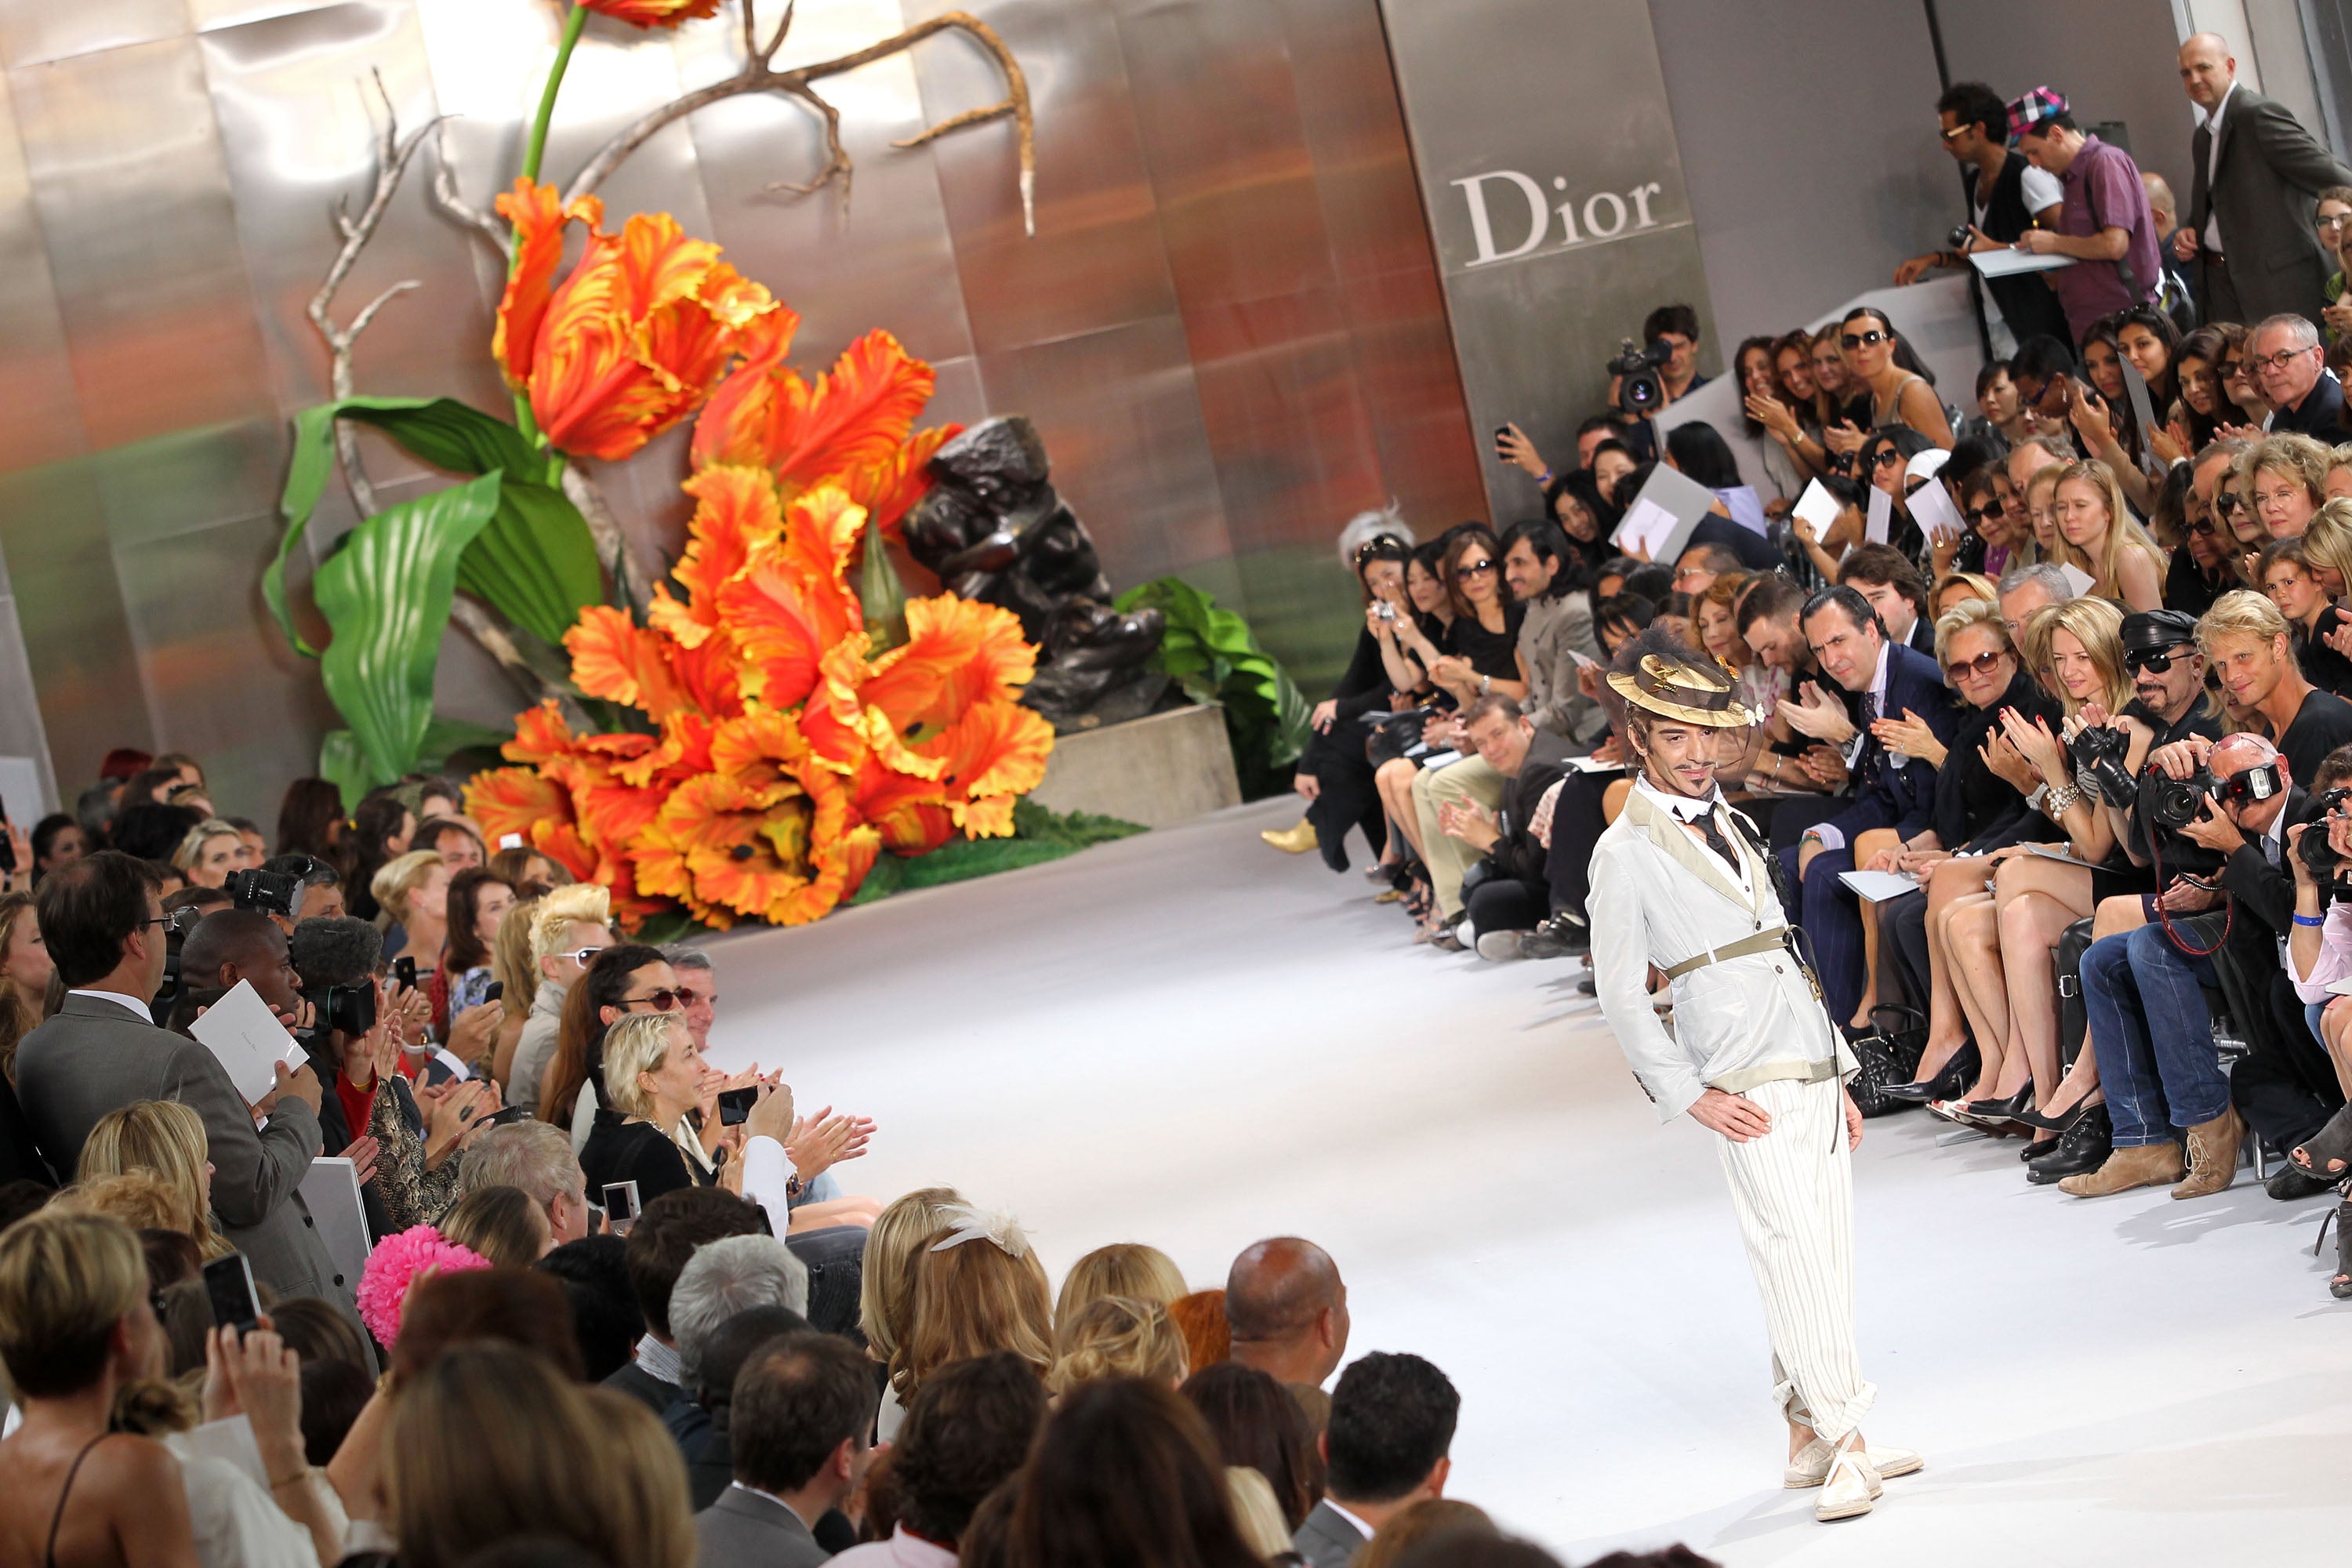 John Galliano walks the runway at the end of the Dior show as part of the Paris Haute Couture Fashion Week Fall/Winter 2011 event at Musee Rodin on 5 July 2010